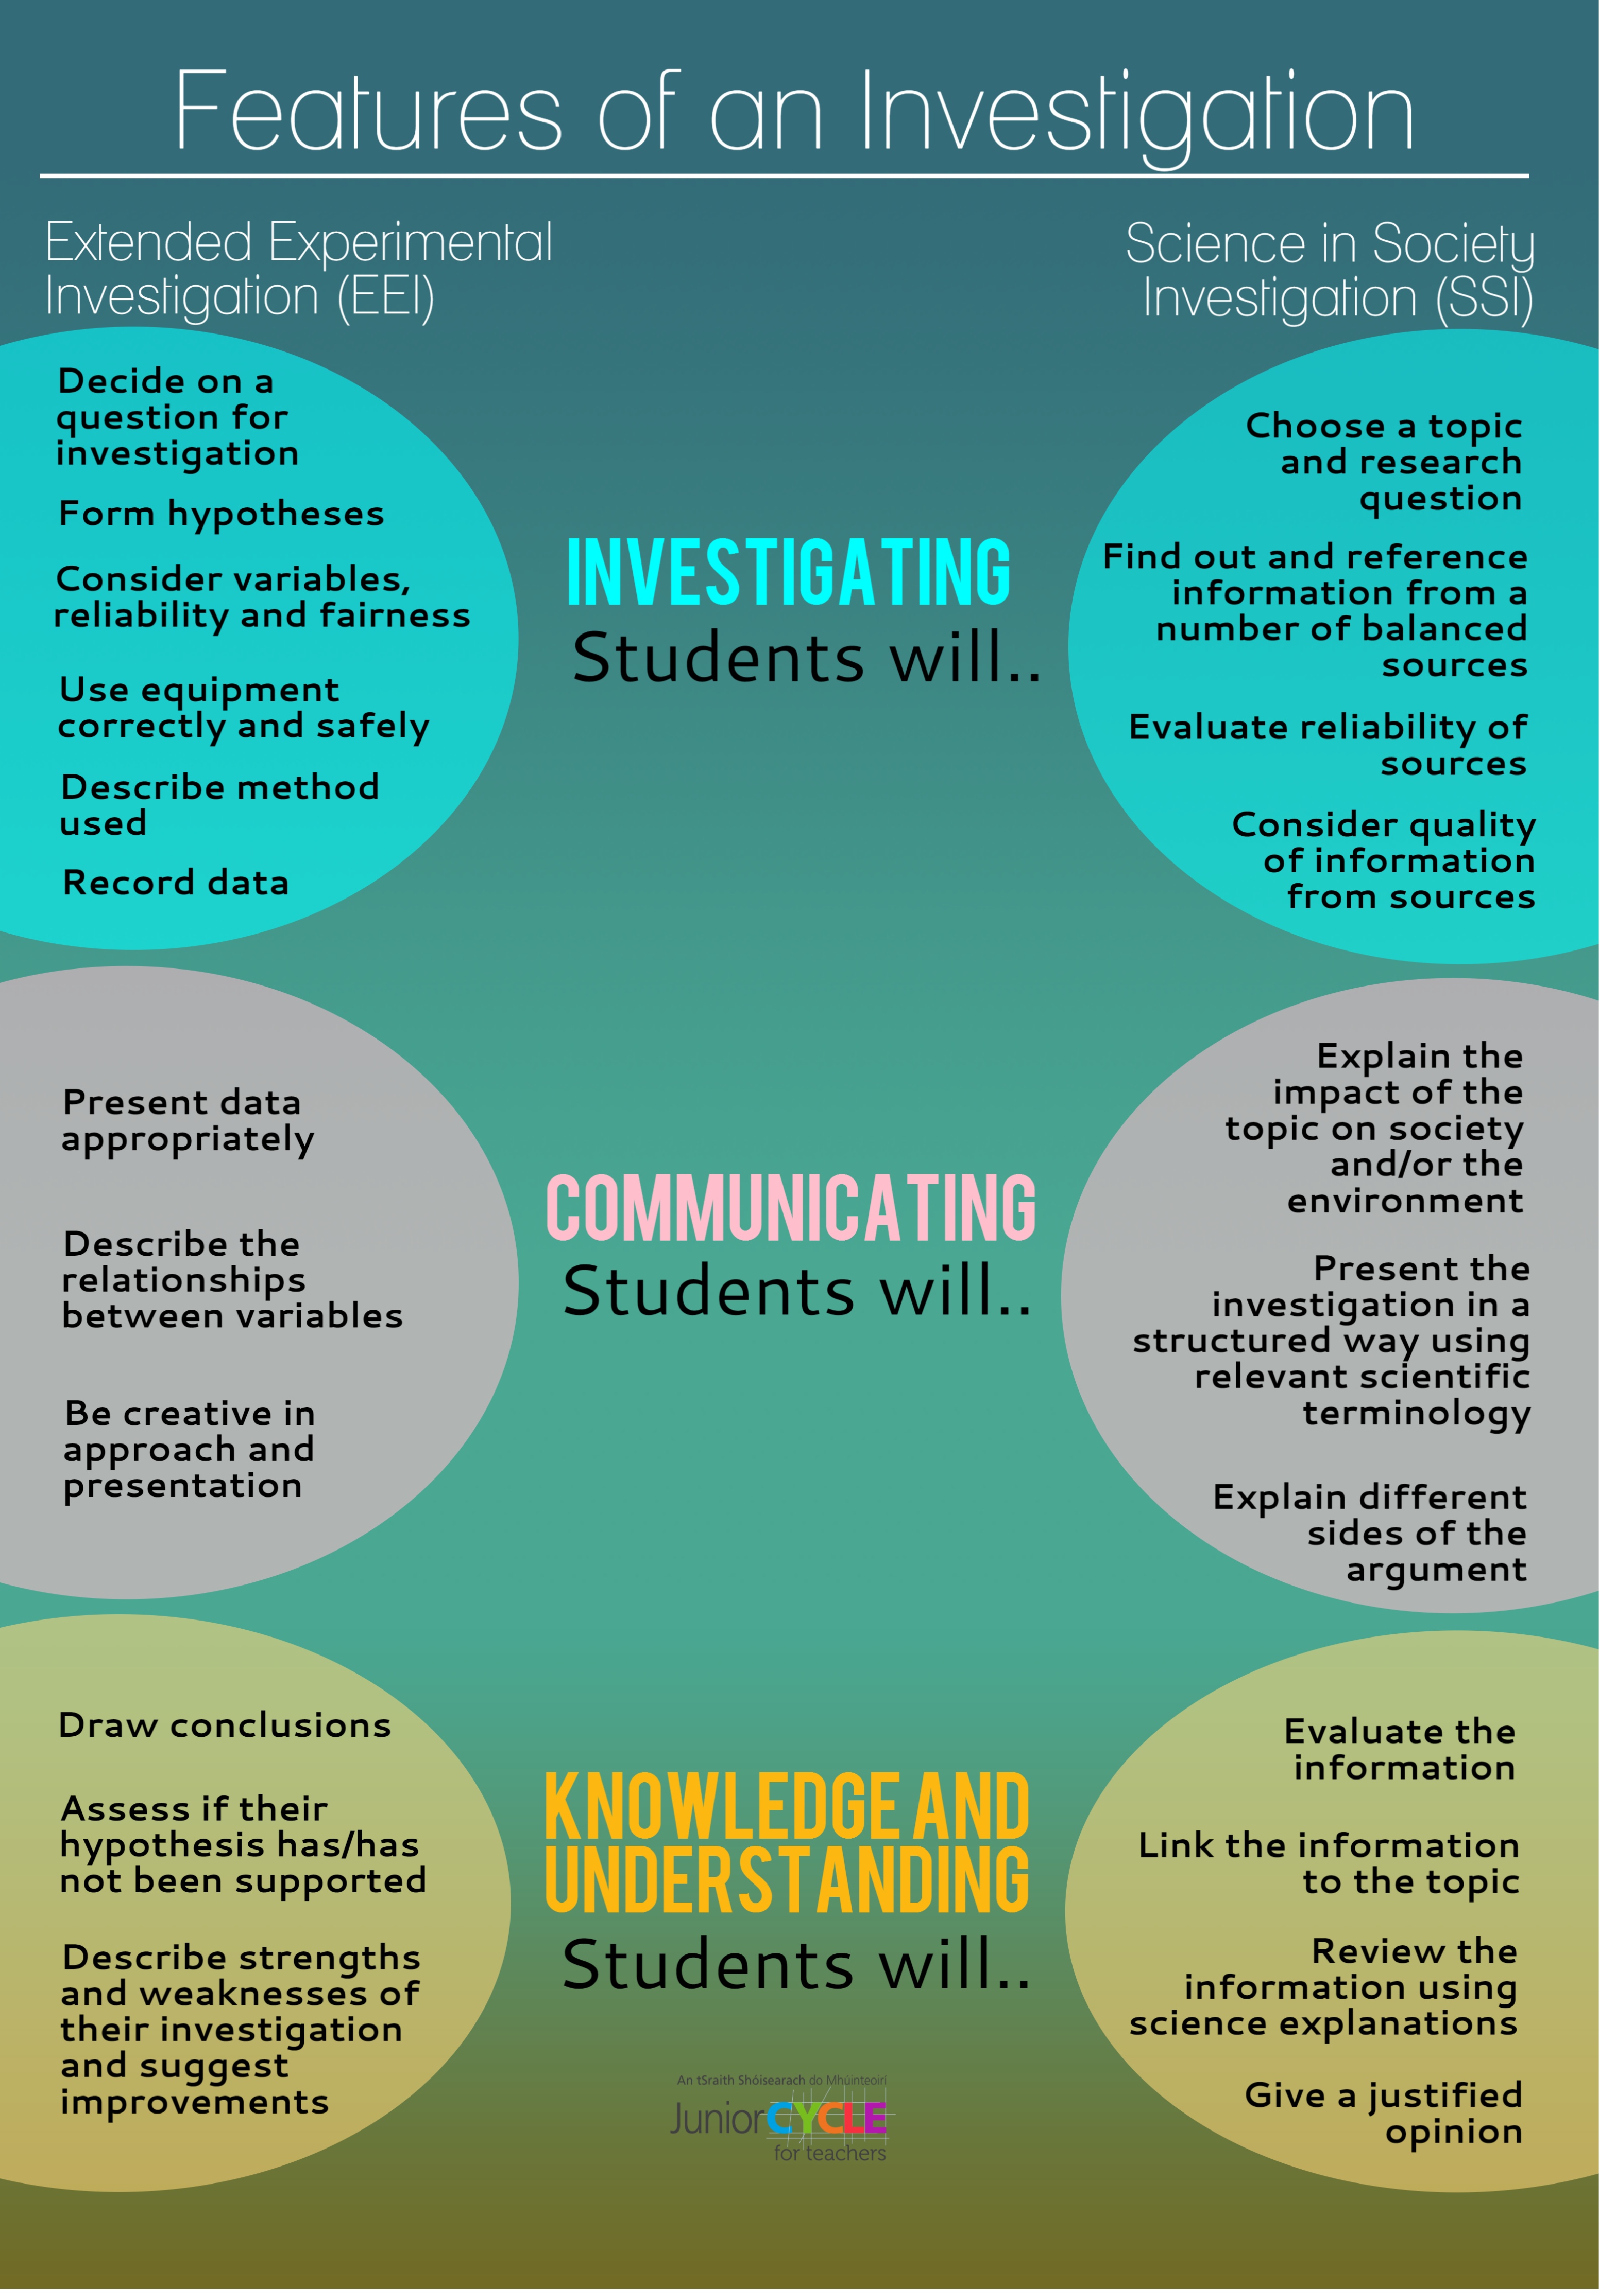 Features of an Investigation Poster